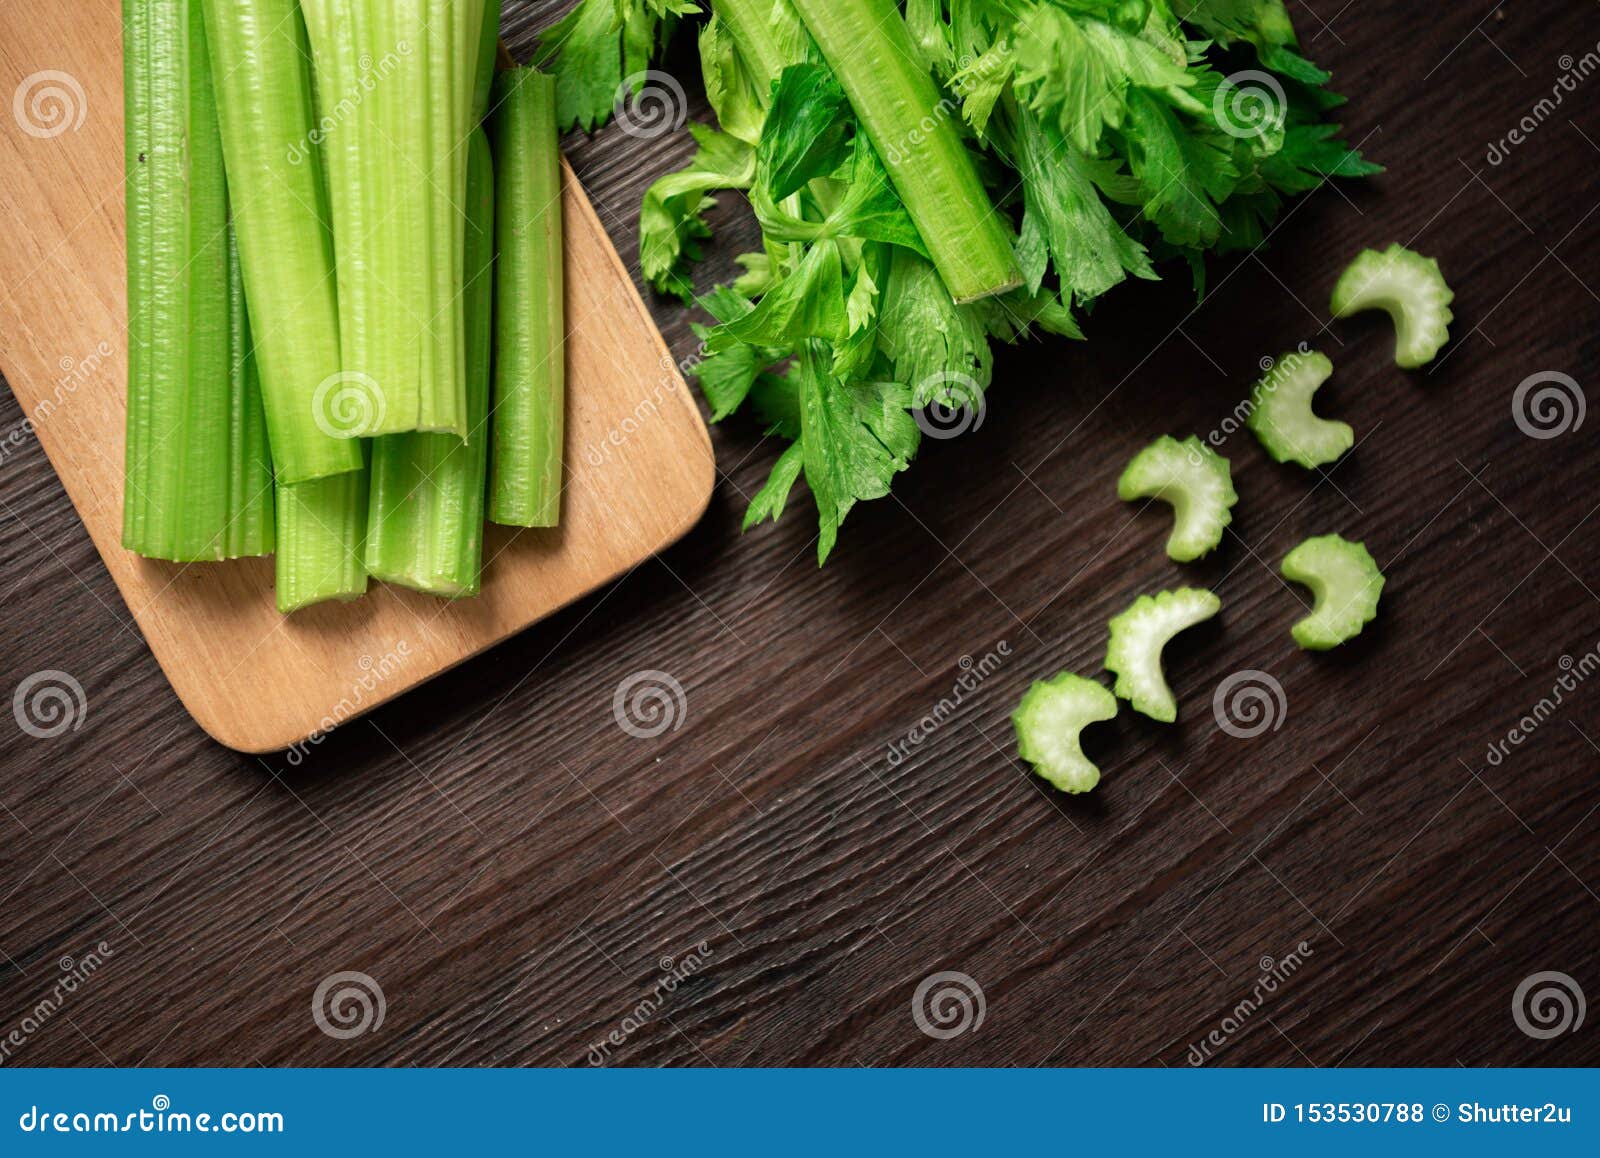 repose wooden crocodile Top View of Bunch of Fresh Sliced Celery Stalk on Wooden Table with Leaves.  Food and Ingredients of Healthy Vegetable Stock Photo - Image of  agriculture, cuisine: 153530788